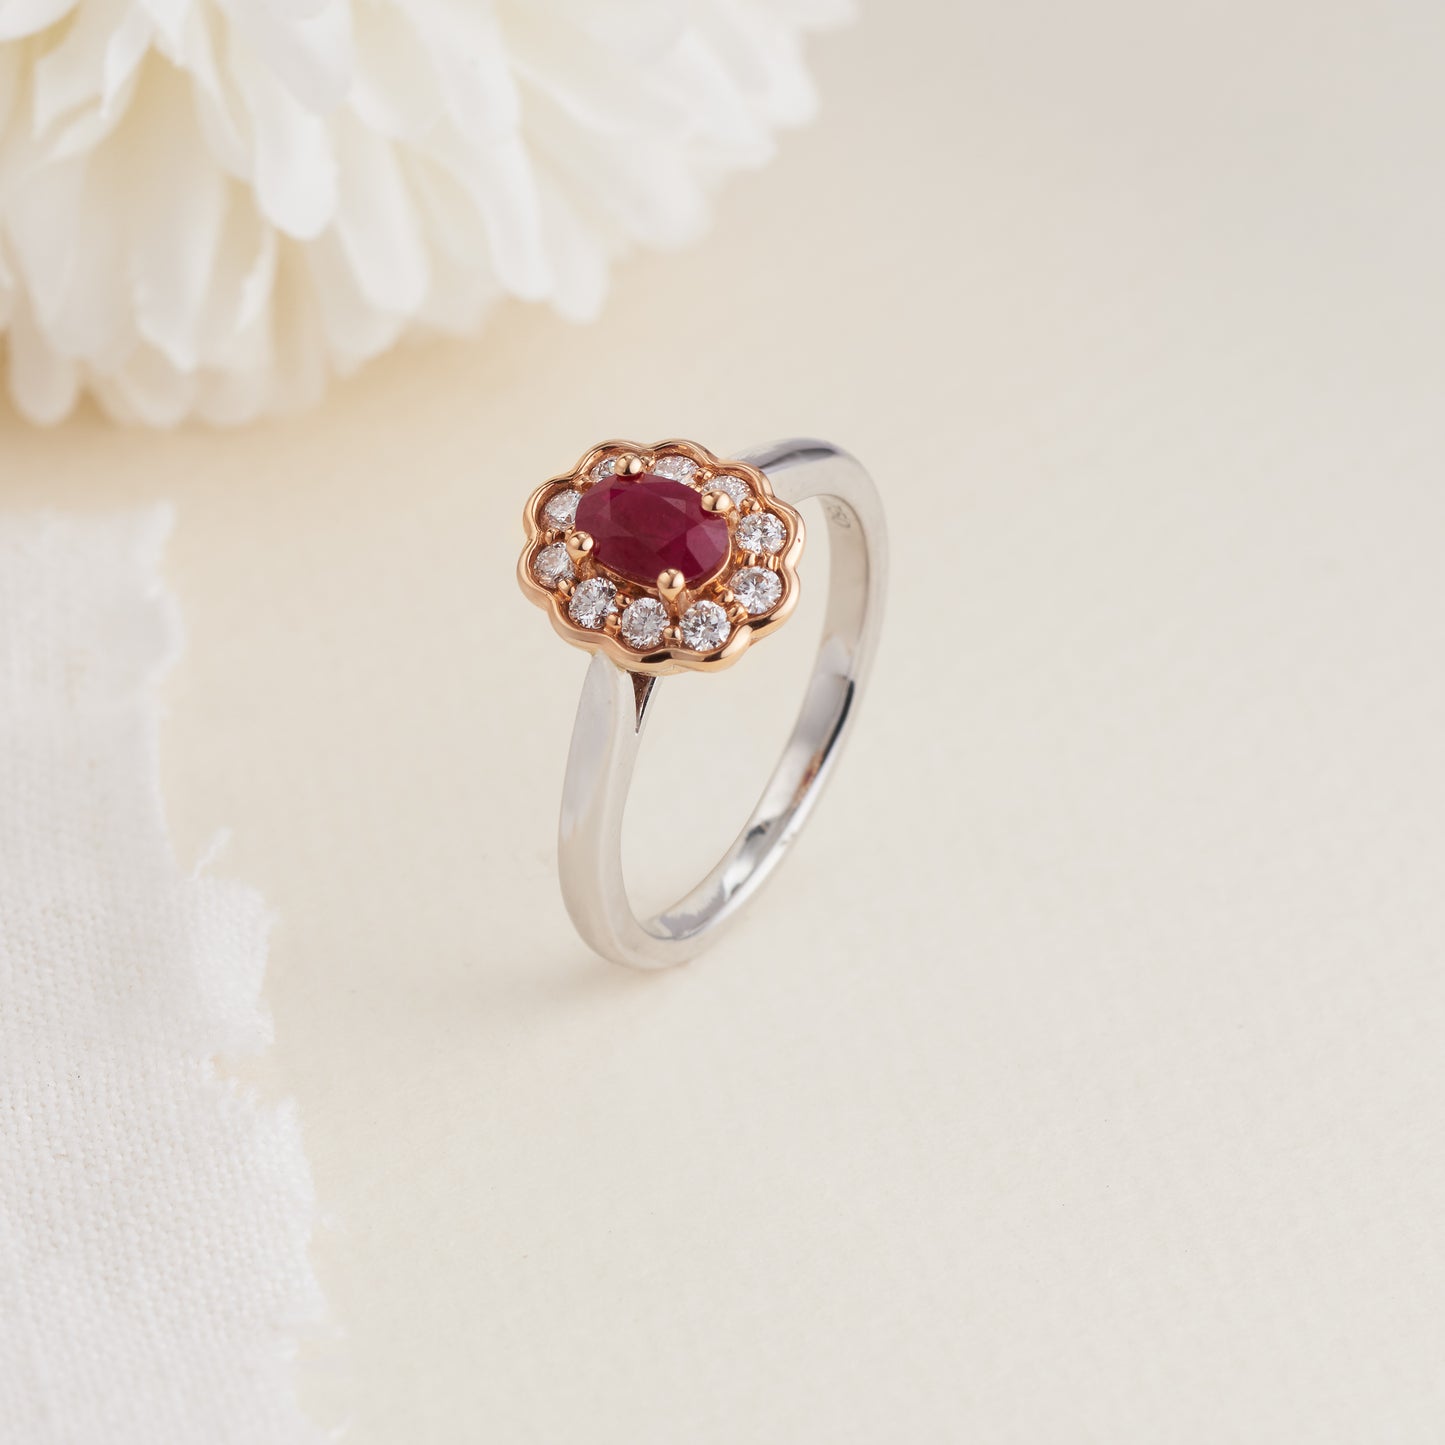 18K White and Rose Gold Oval Natural Ruby Diamond Halo Ring 0.27tdw